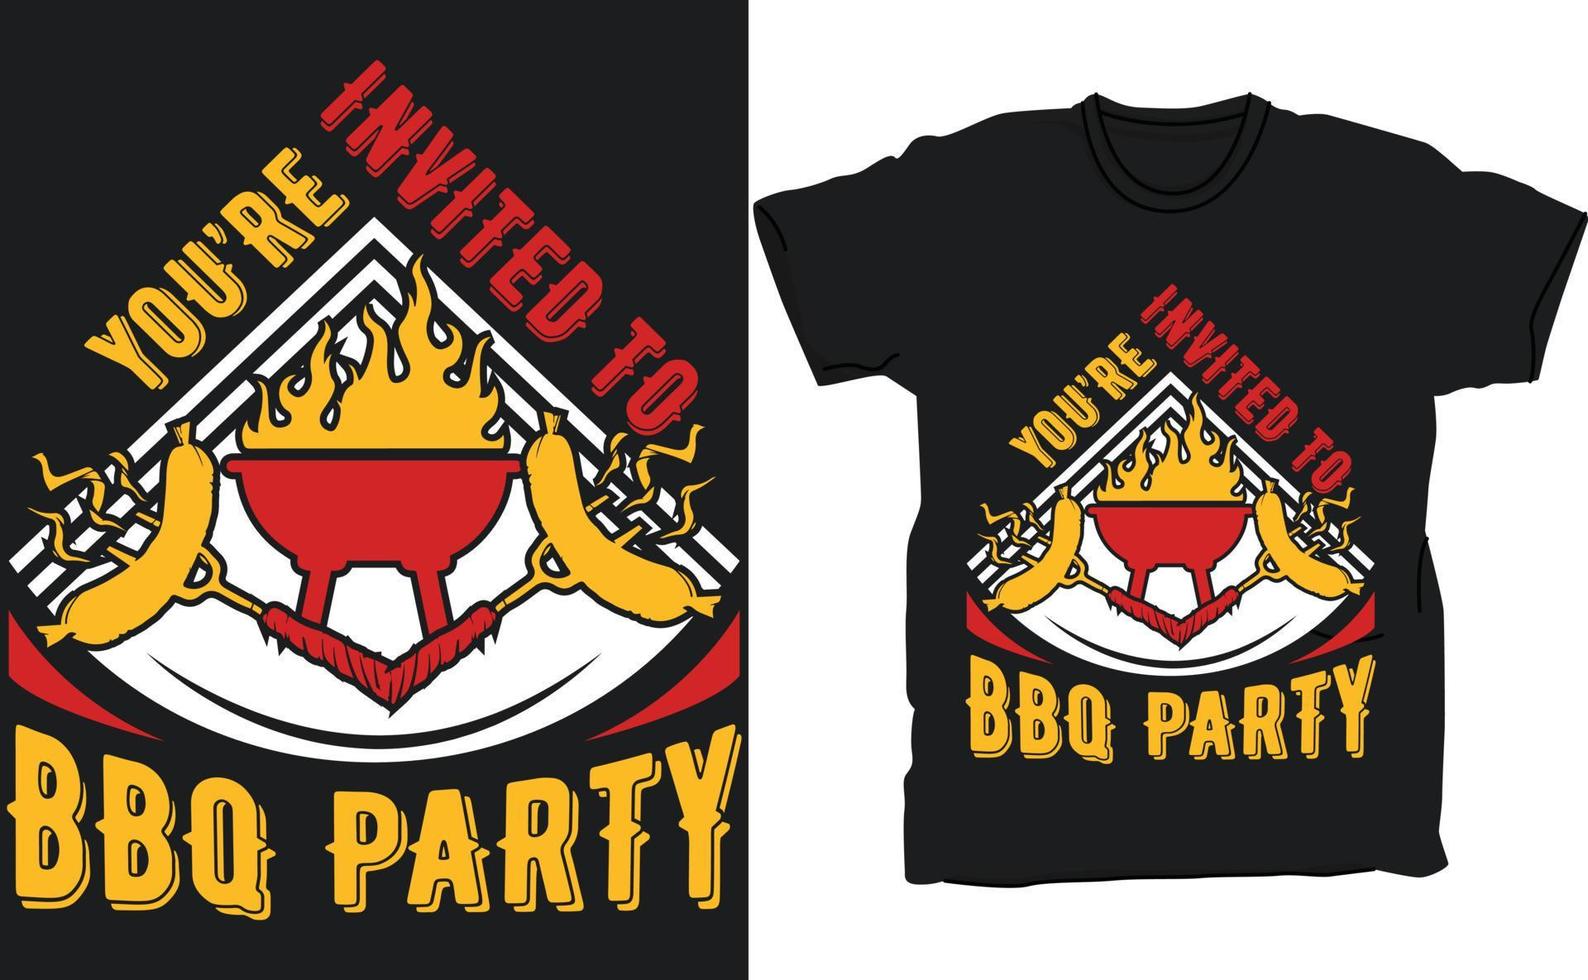 You are invited to BBQ party vector typography t-shirt design. Perfect for print items and bags, posters, cards, vector illustration. Isolated on black.